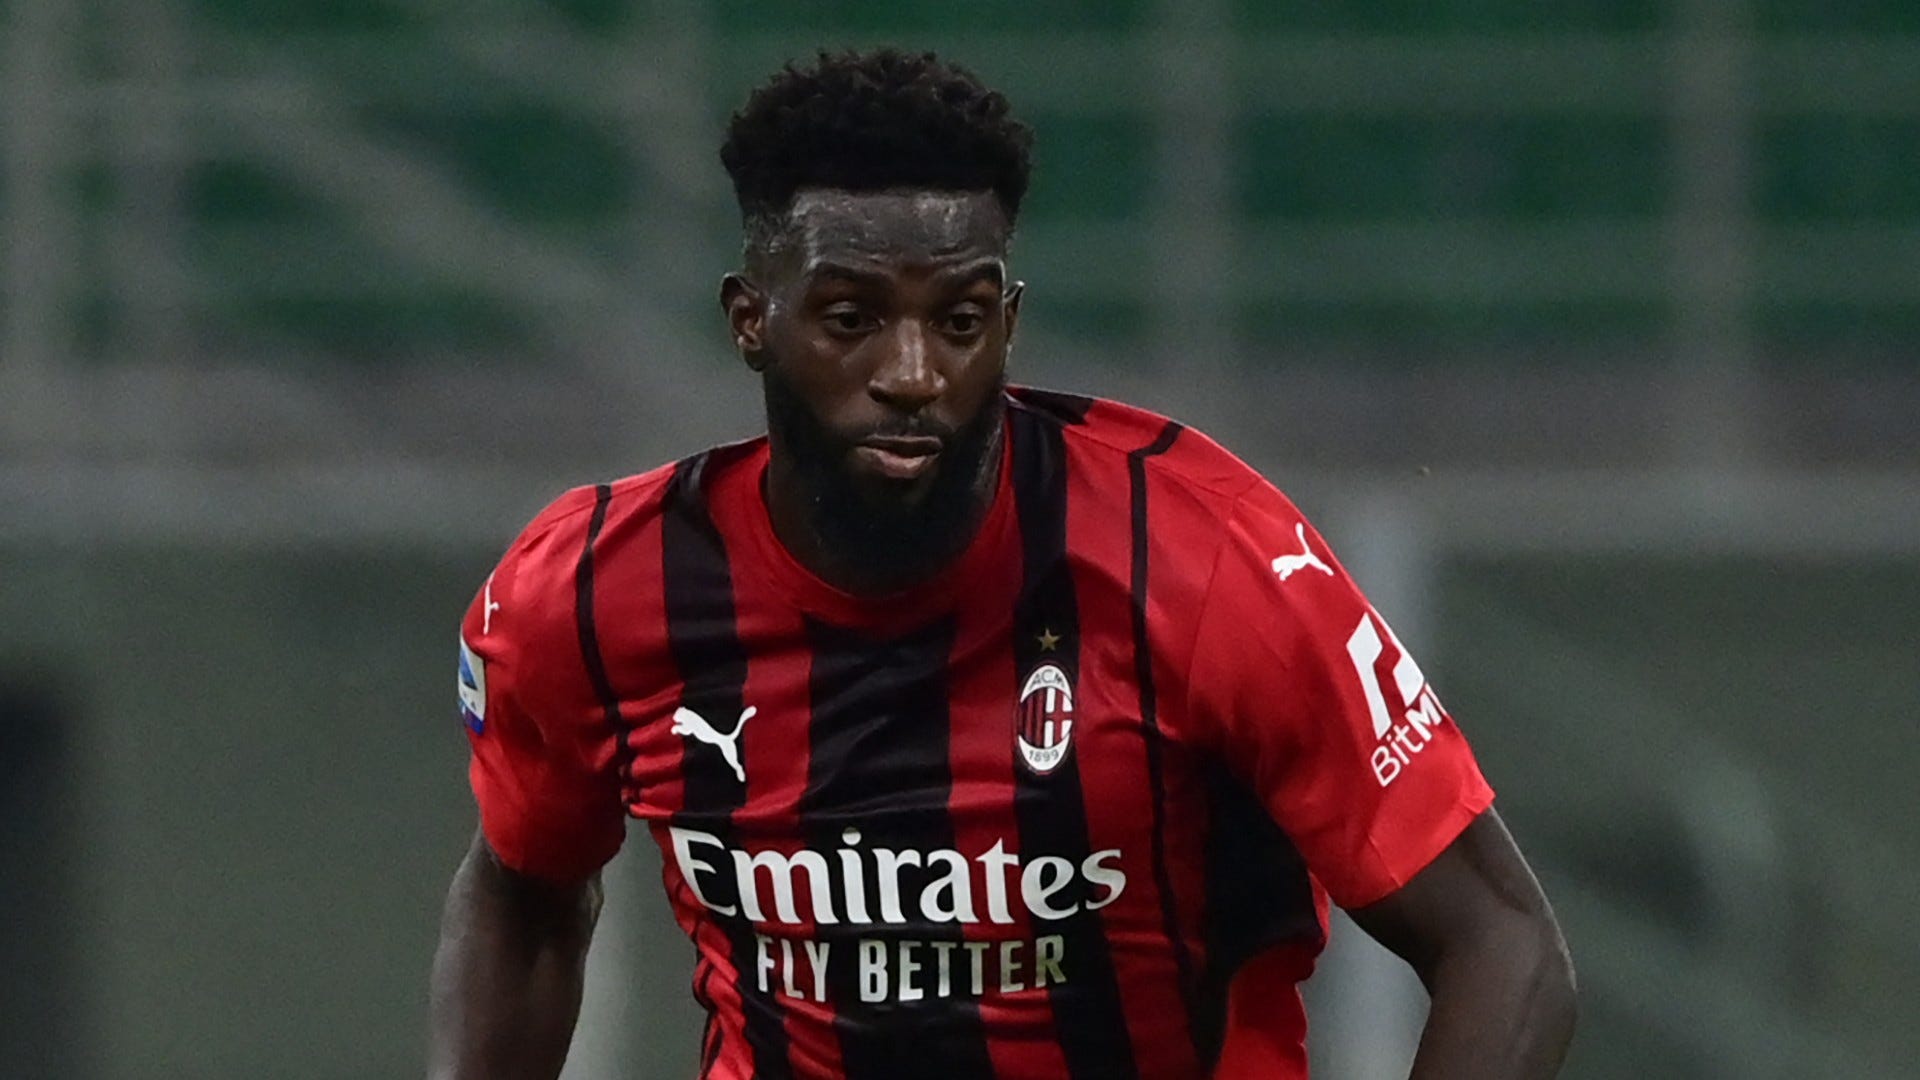 Chelsea loanee Bakayoko stopped and searched by armed police in Milan in  case of mistaken identity | Goal.com US